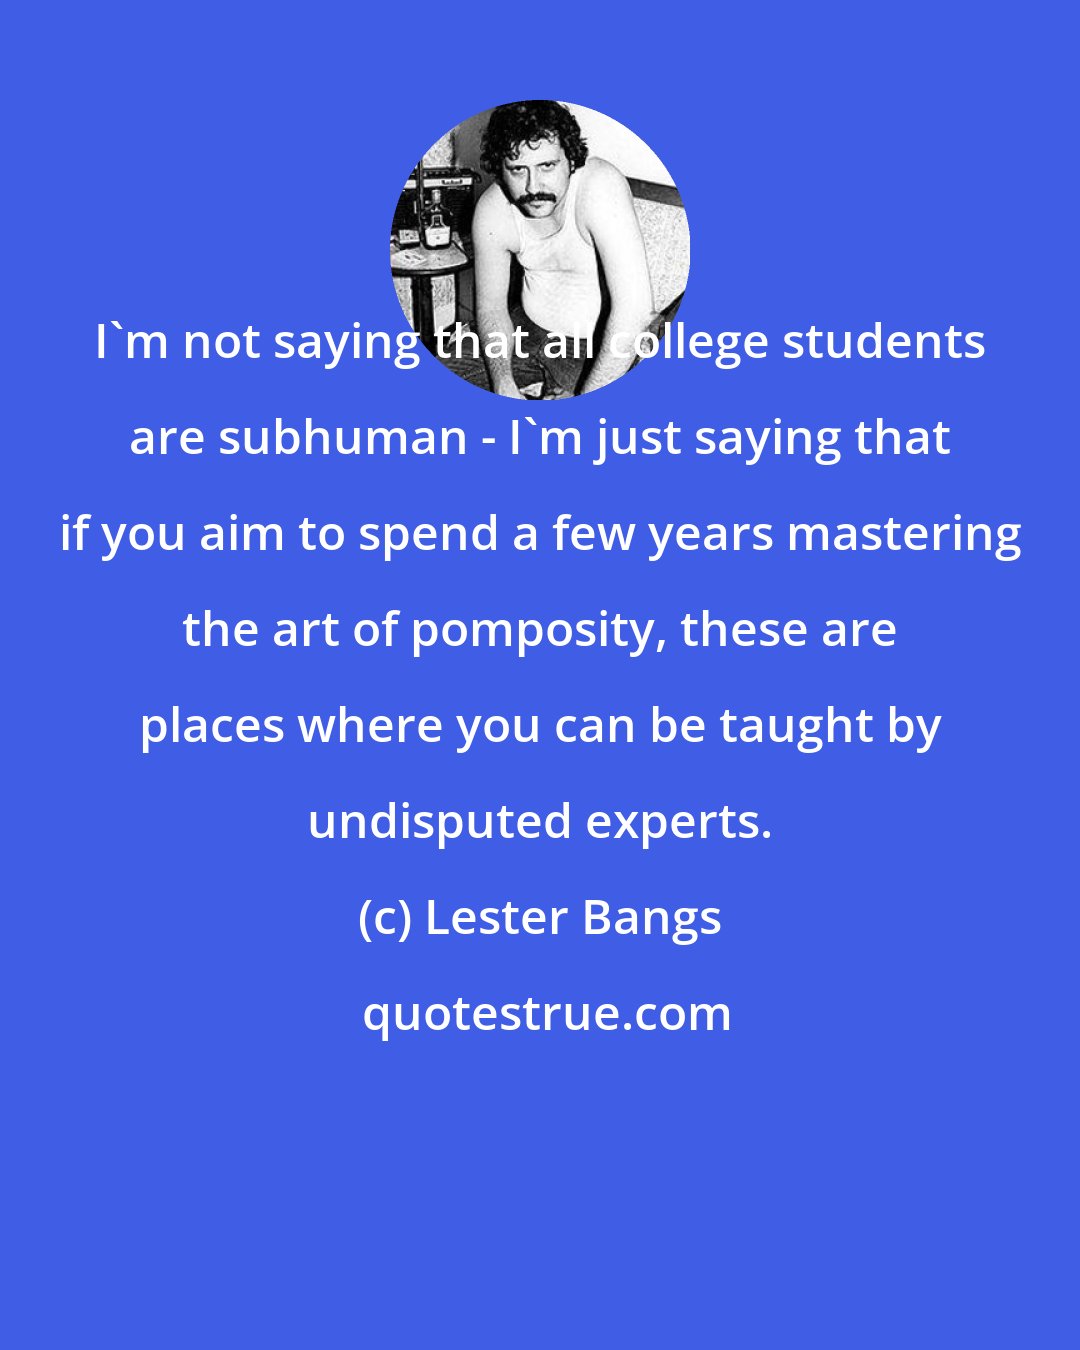 Lester Bangs: I'm not saying that all college students are subhuman - I'm just saying that if you aim to spend a few years mastering the art of pomposity, these are places where you can be taught by undisputed experts.